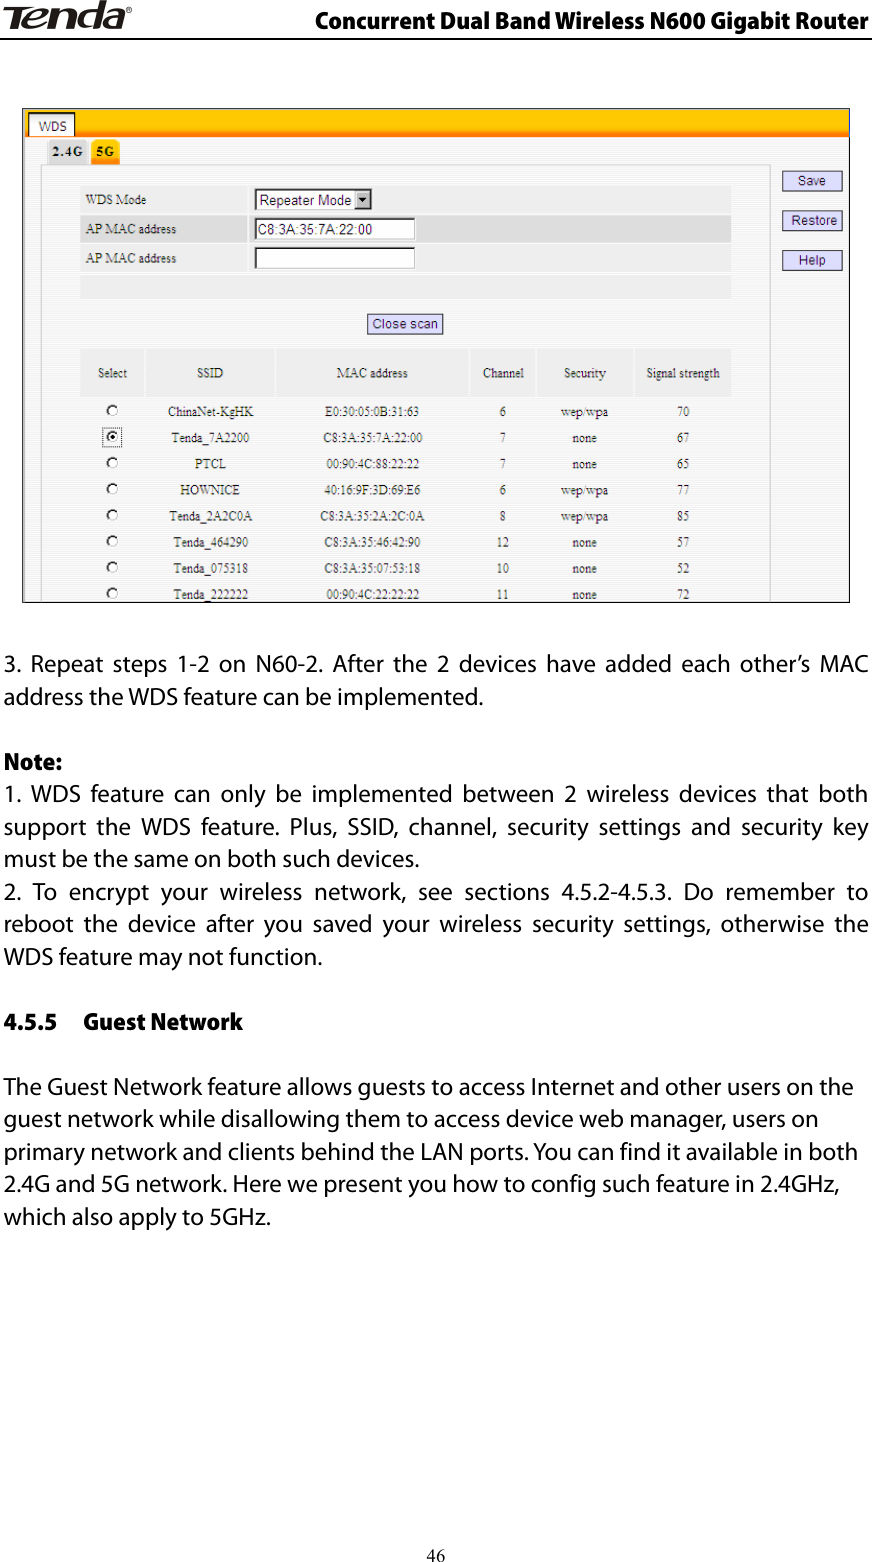                      Concurrent Dual Band Wireless N600 Gigabit Router    3. Repeat steps 1-2 on N60-2. After the 2 devices have added each other’s MAC address the WDS feature can be implemented.  Note:  1. WDS feature can only be implemented between 2 wireless devices that both support the WDS feature. Plus, SSID, channel, security settings and security key must be the same on both such devices. 2. To encrypt your wireless network, see sections 4.5.2-4.5.3. Do remember to reboot the device after you saved your wireless security settings, otherwise the WDS feature may not function.  4.5.5 Guest Network  The Guest Network feature allows guests to access Internet and other users on the guest network while disallowing them to access device web manager, users on primary network and clients behind the LAN ports. You can find it available in both 2.4G and 5G network. Here we present you how to config such feature in 2.4GHz, which also apply to 5GHz.         46